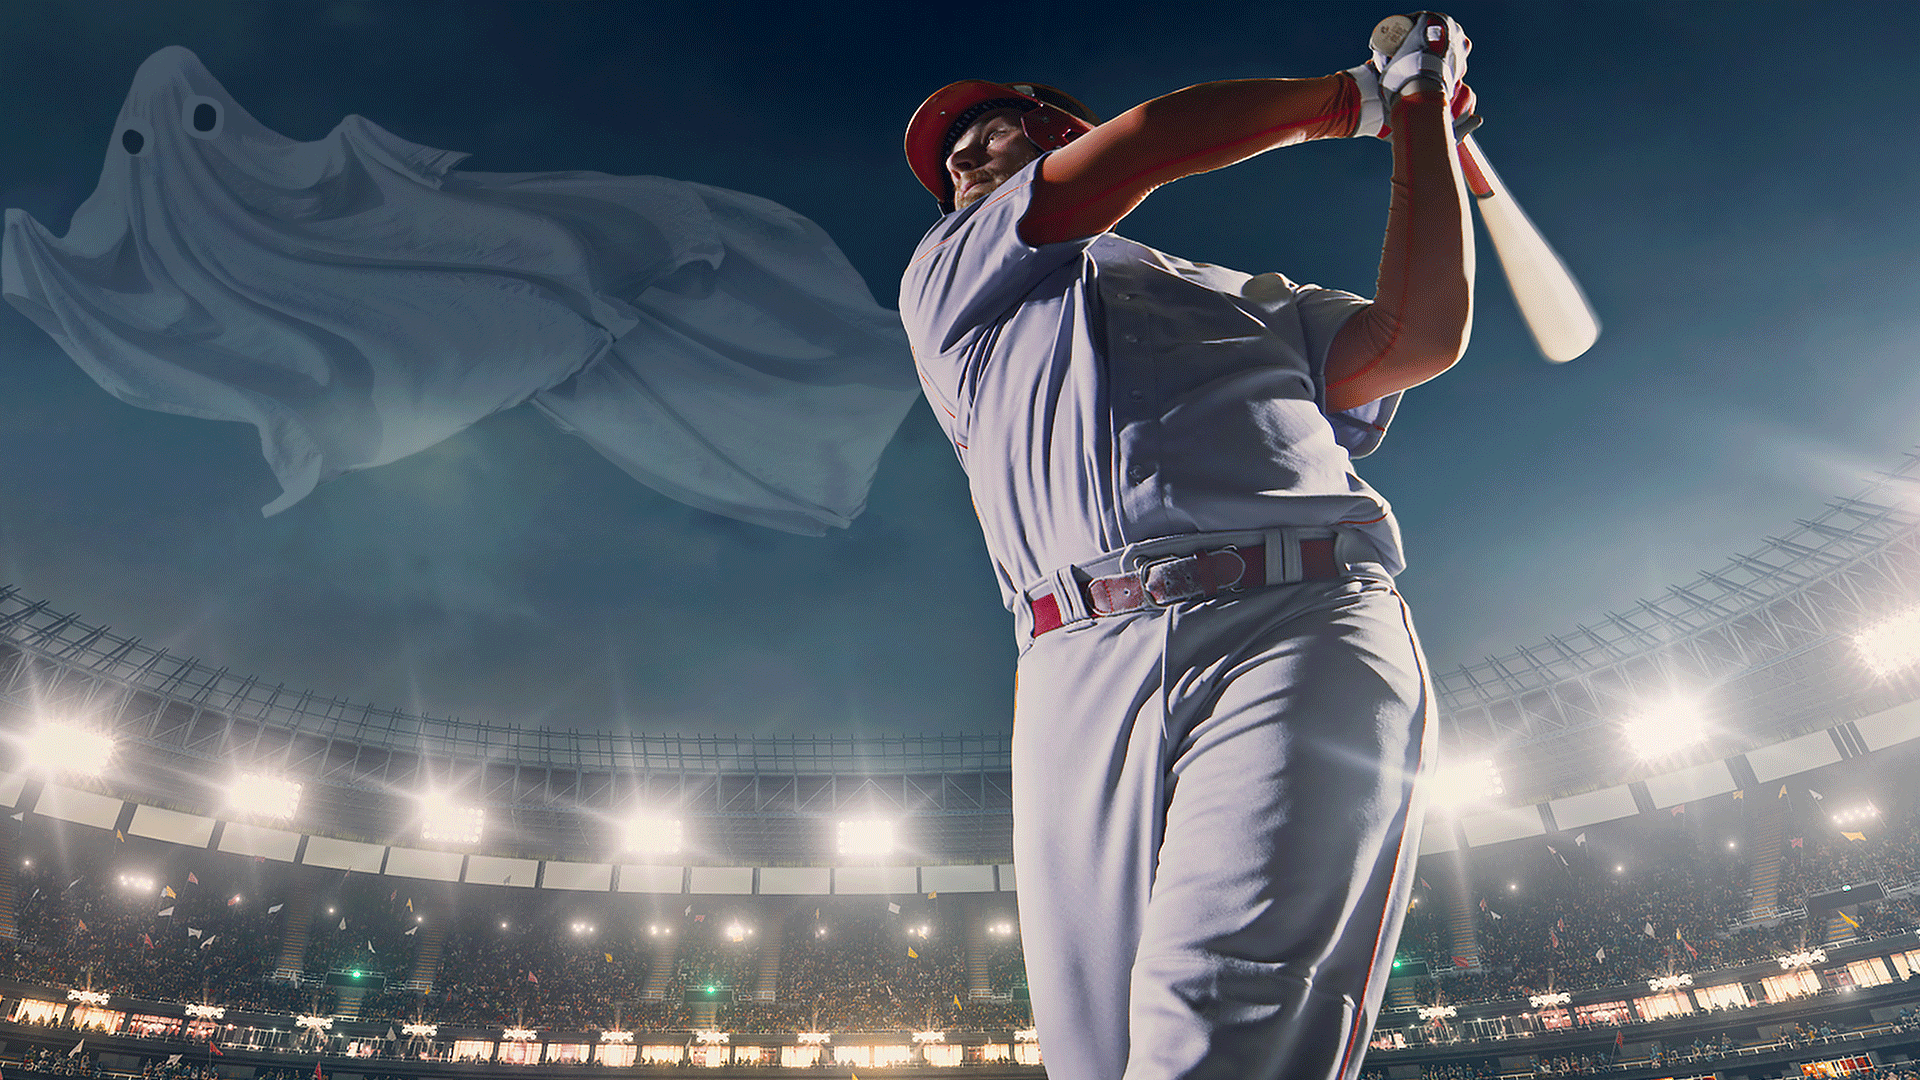 A photo of a baseball player swinging at a ghost